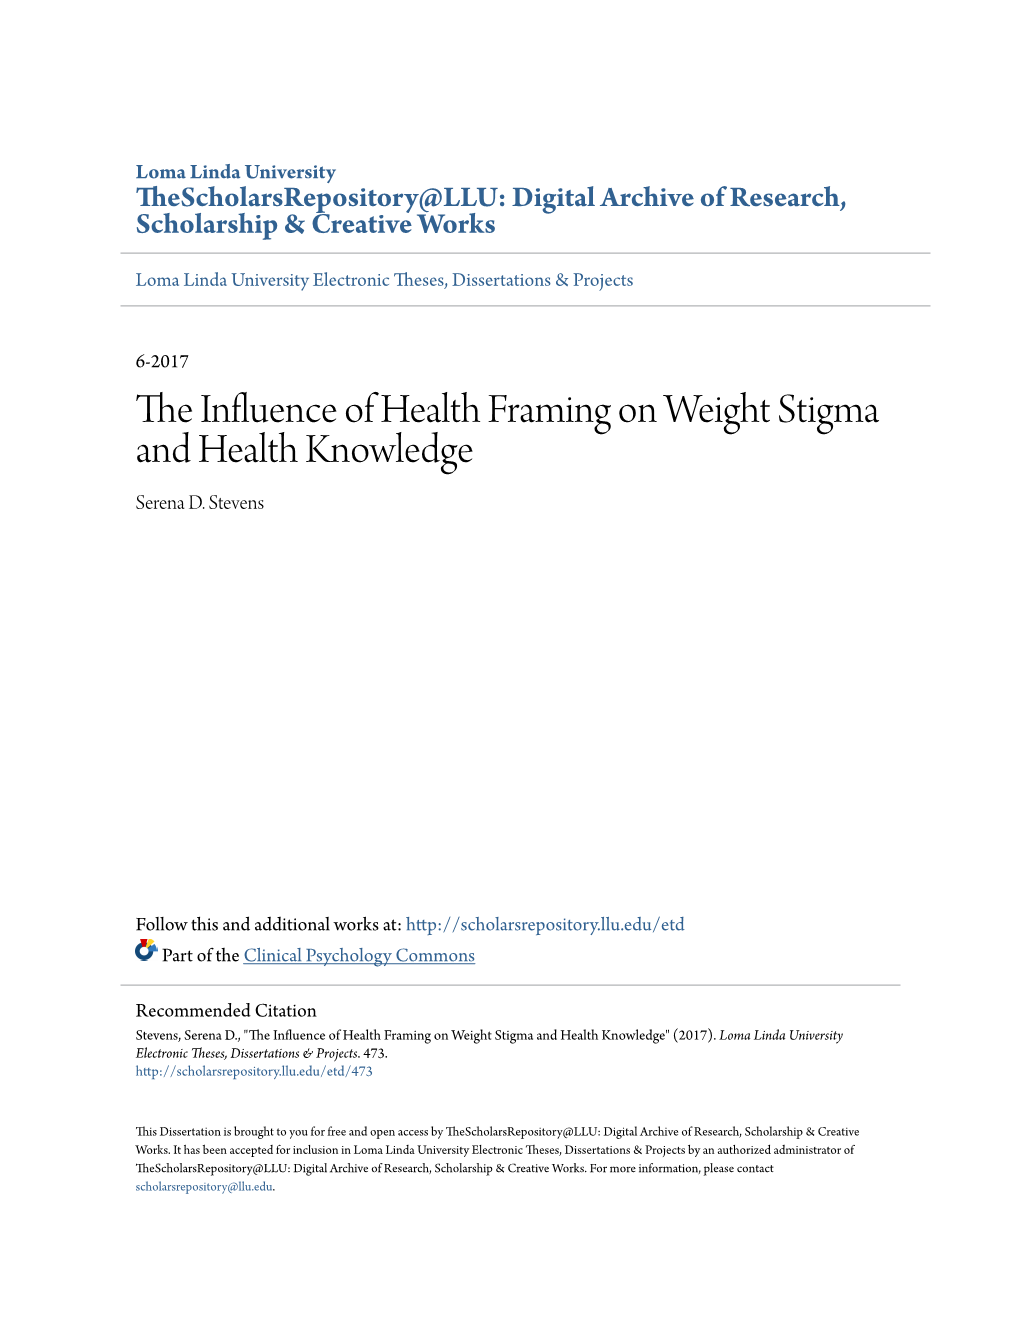 The Influence of Health Framing on Weight Stigma and Health Knowledge